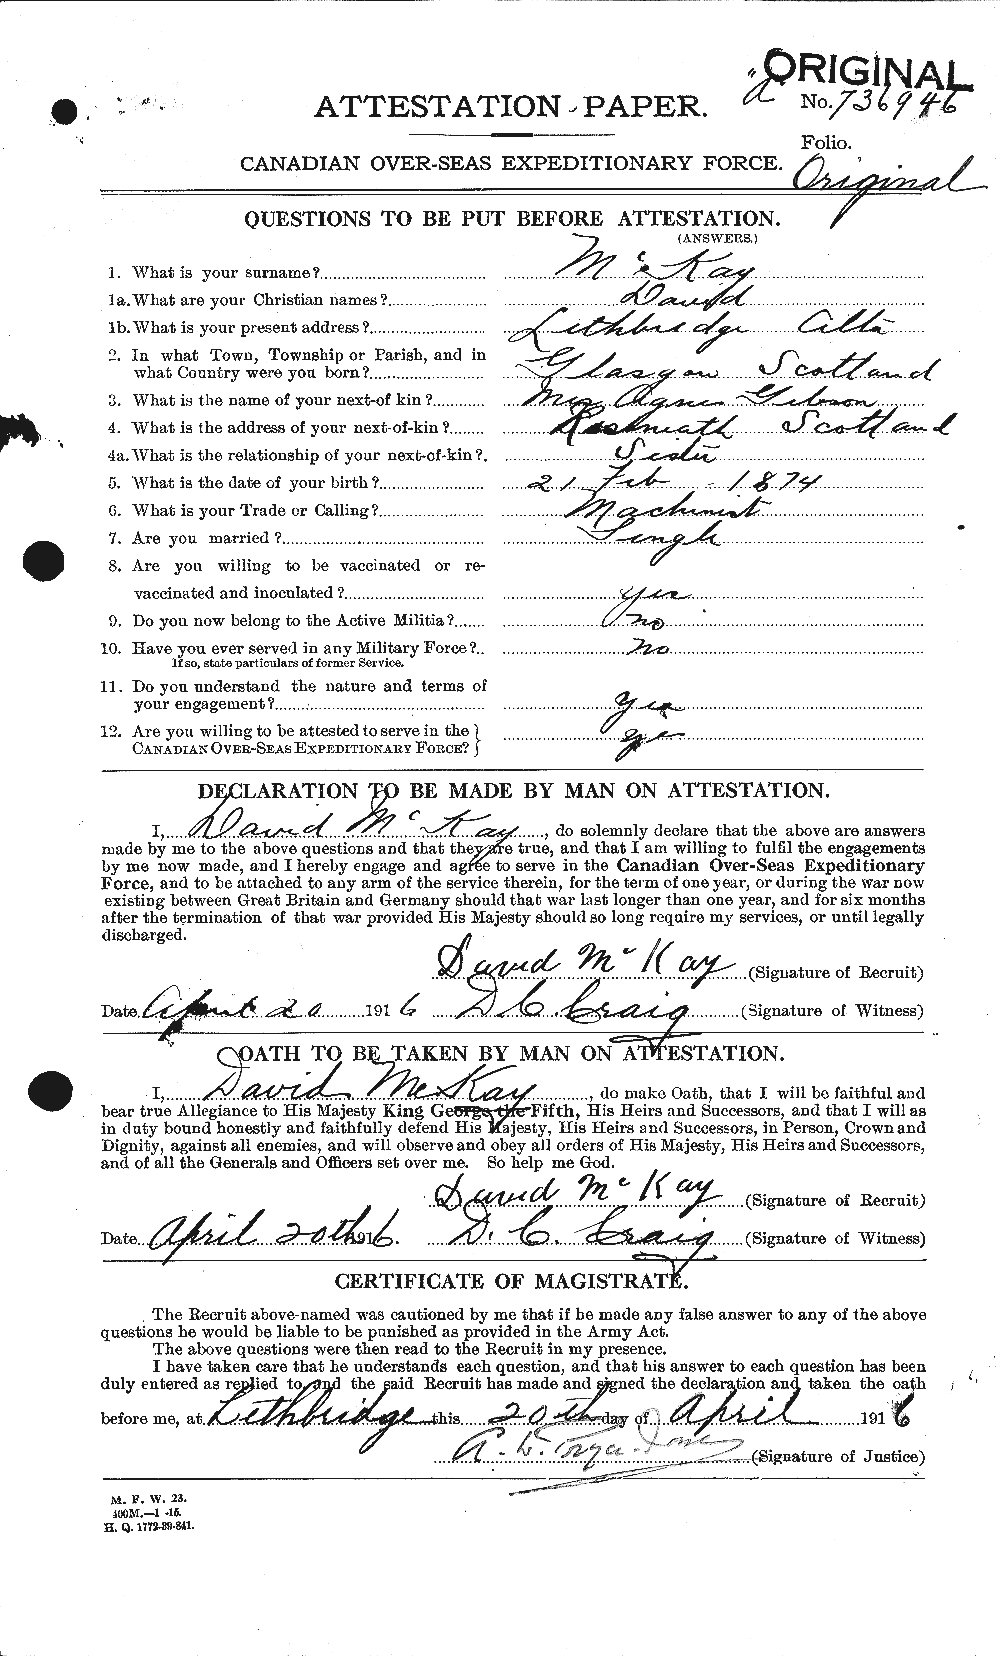 Personnel Records of the First World War - CEF 531127a